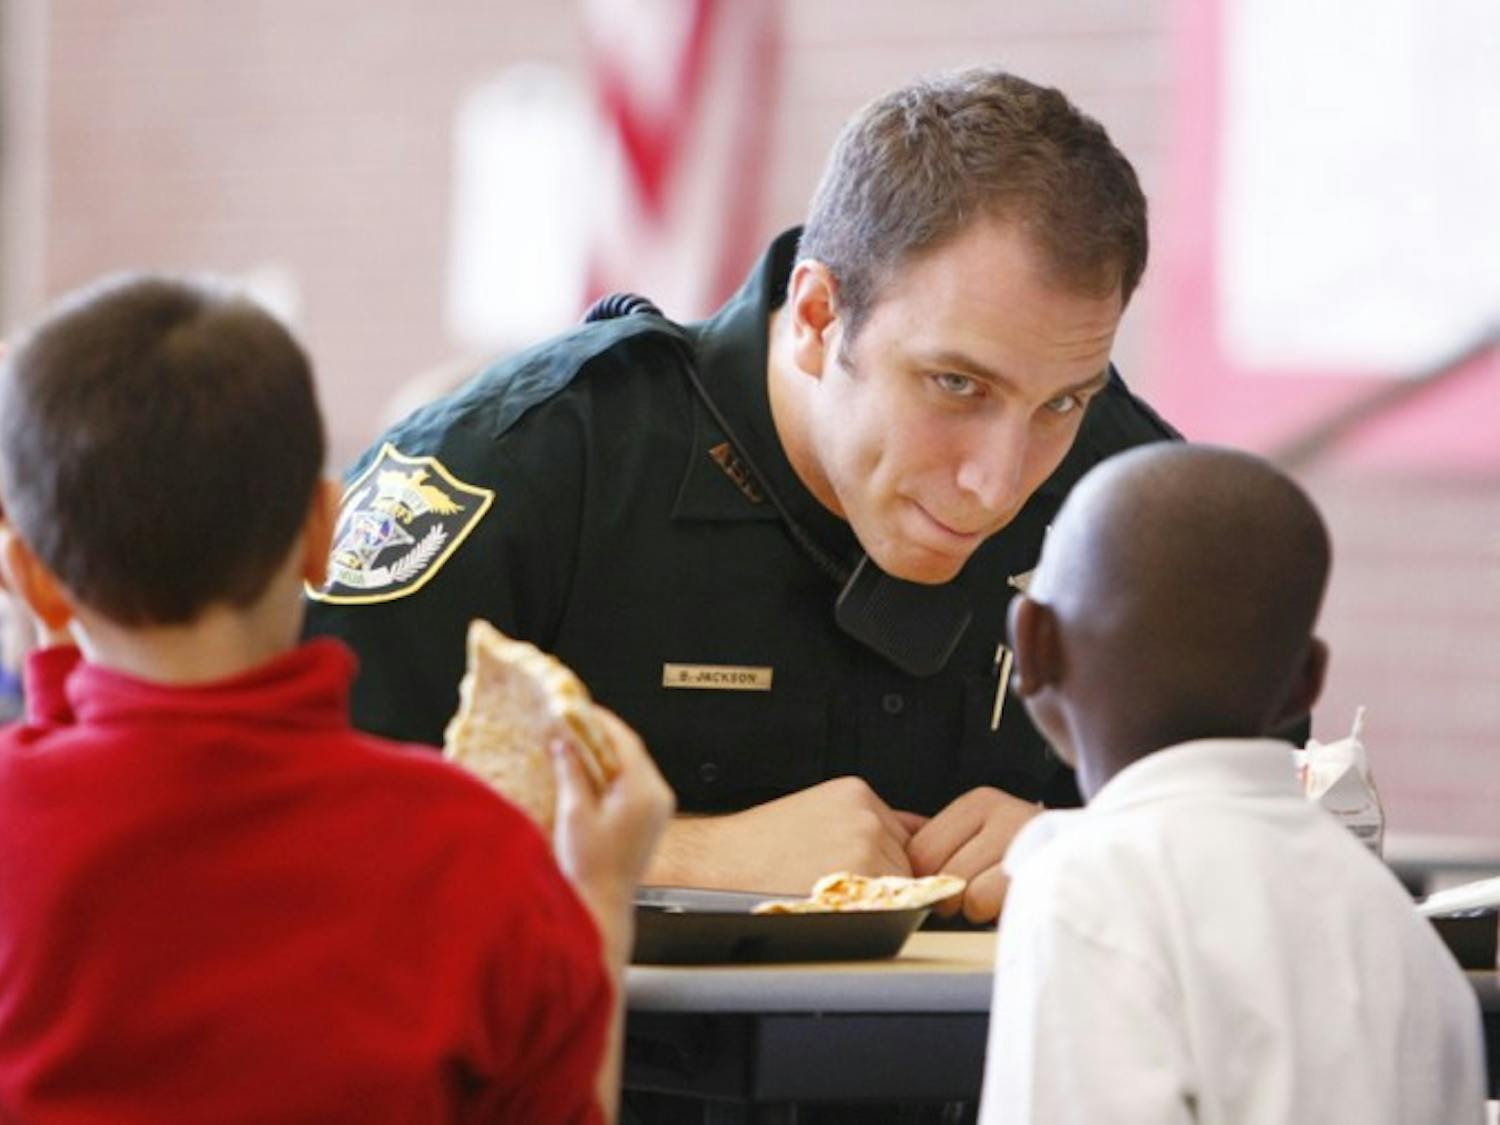 Dept. Jackson of the Alachua County Sherifs Office interacts with students at lunch on Friday at the Meadowbrook Elementary cafeteria during his second day of being stationed at the school.